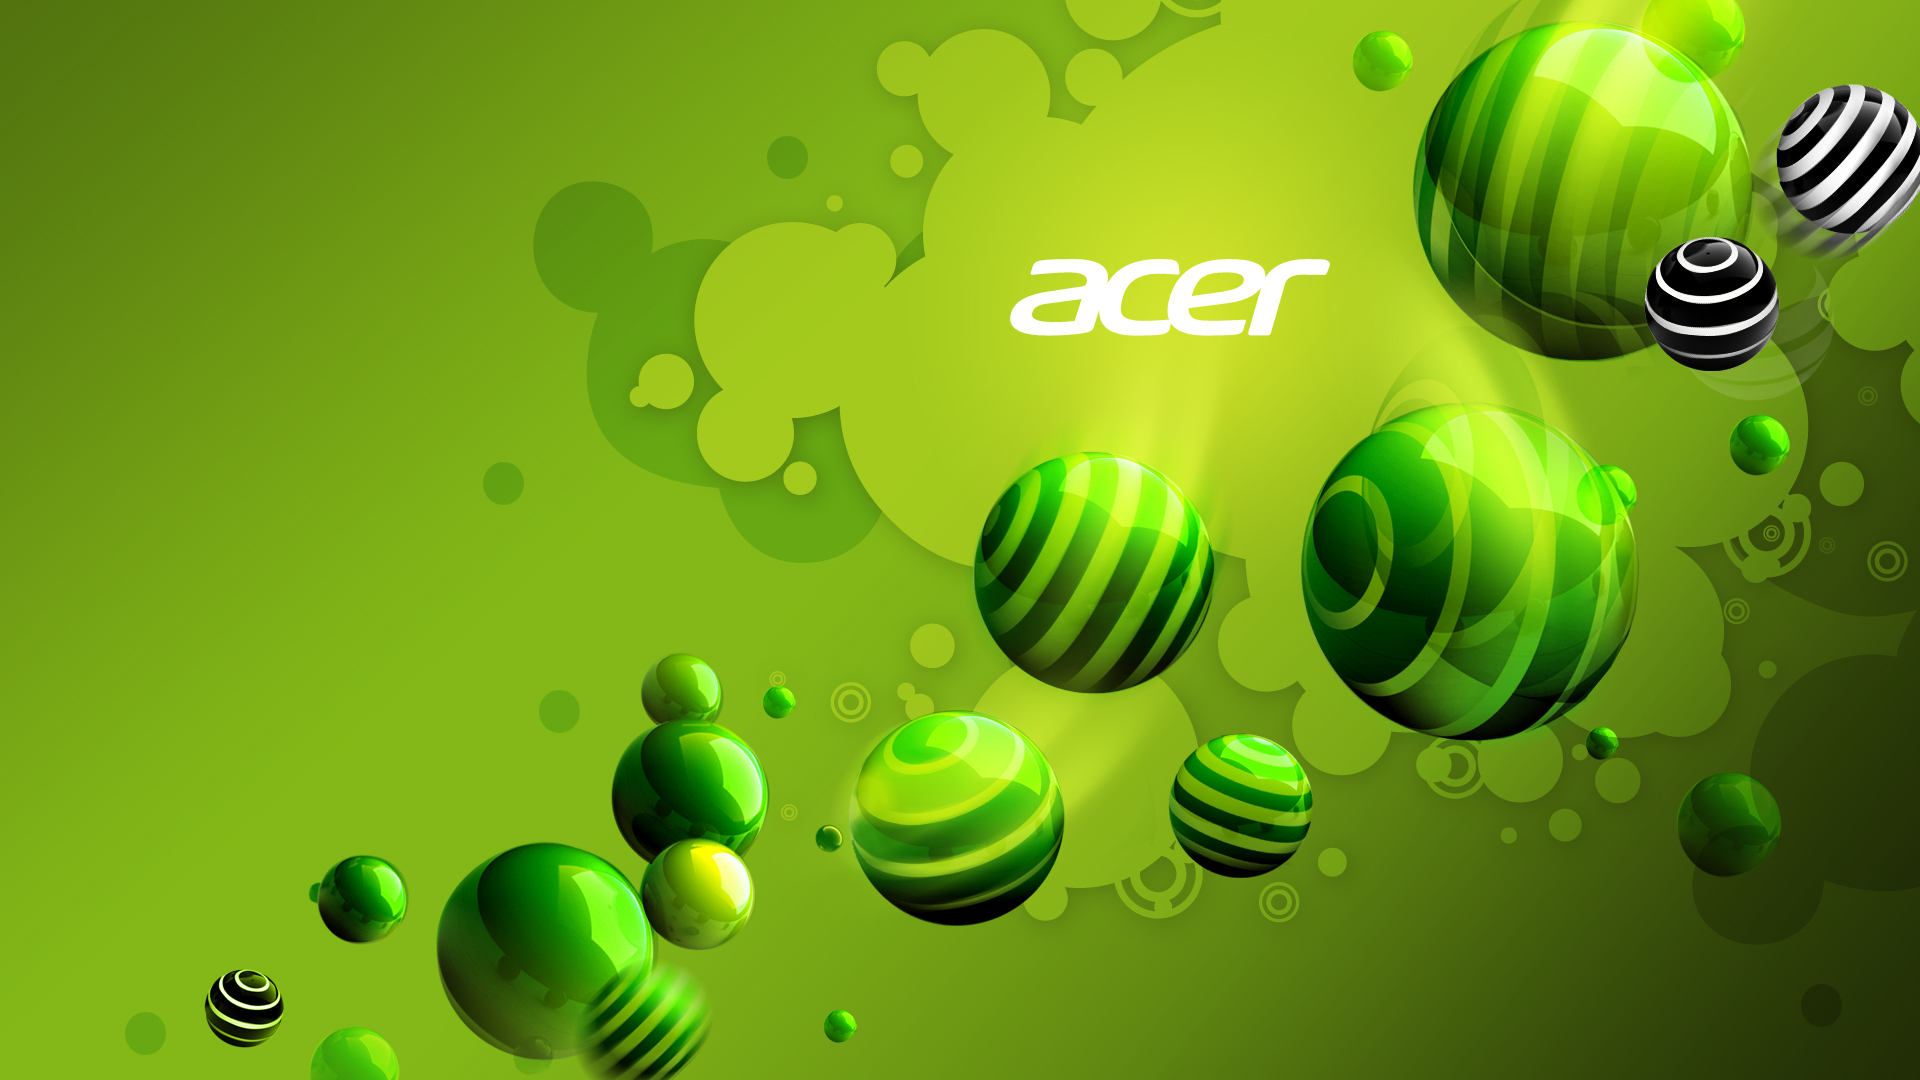 your acer wallpaper then right click and click save as you will now